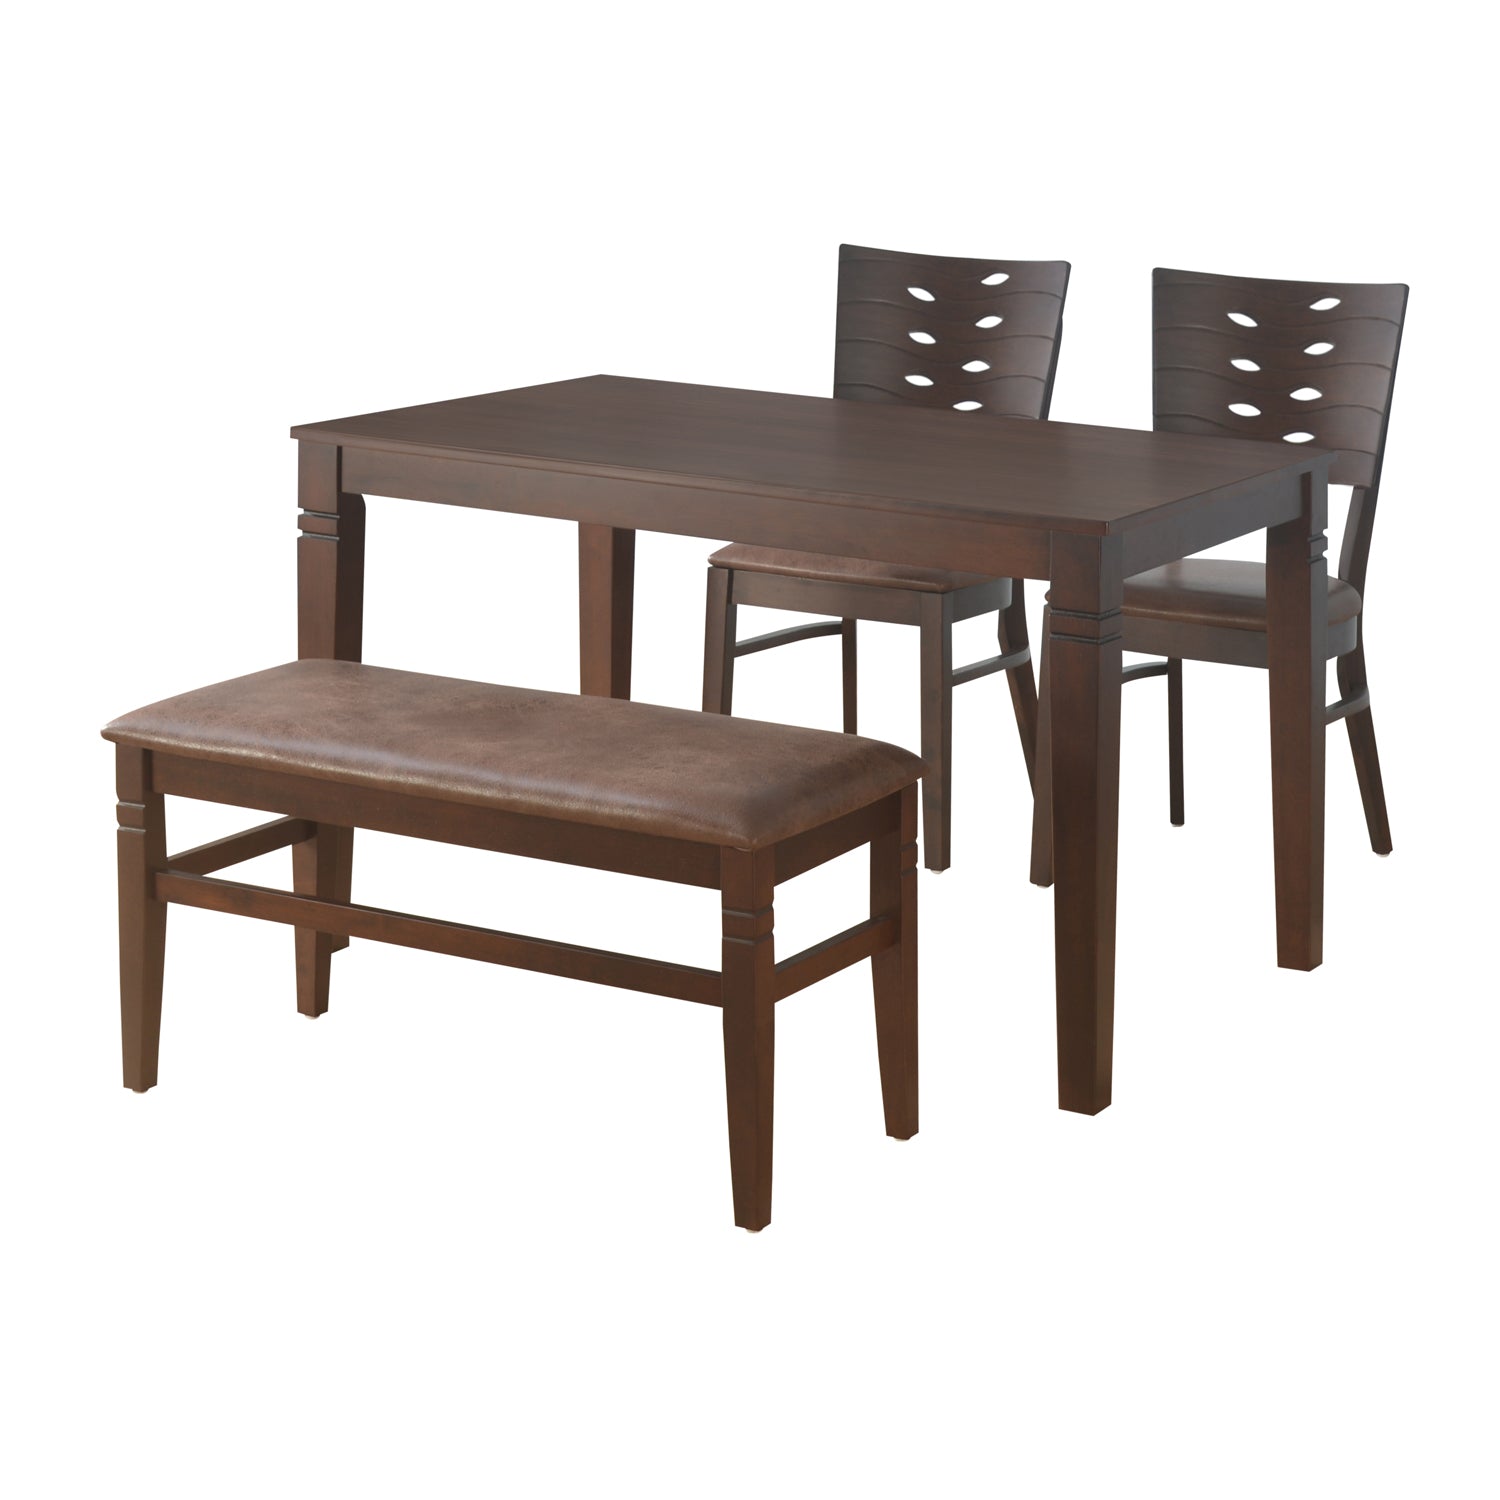 Fern 4 Seater Dining Set With Bench (Erin Brown)